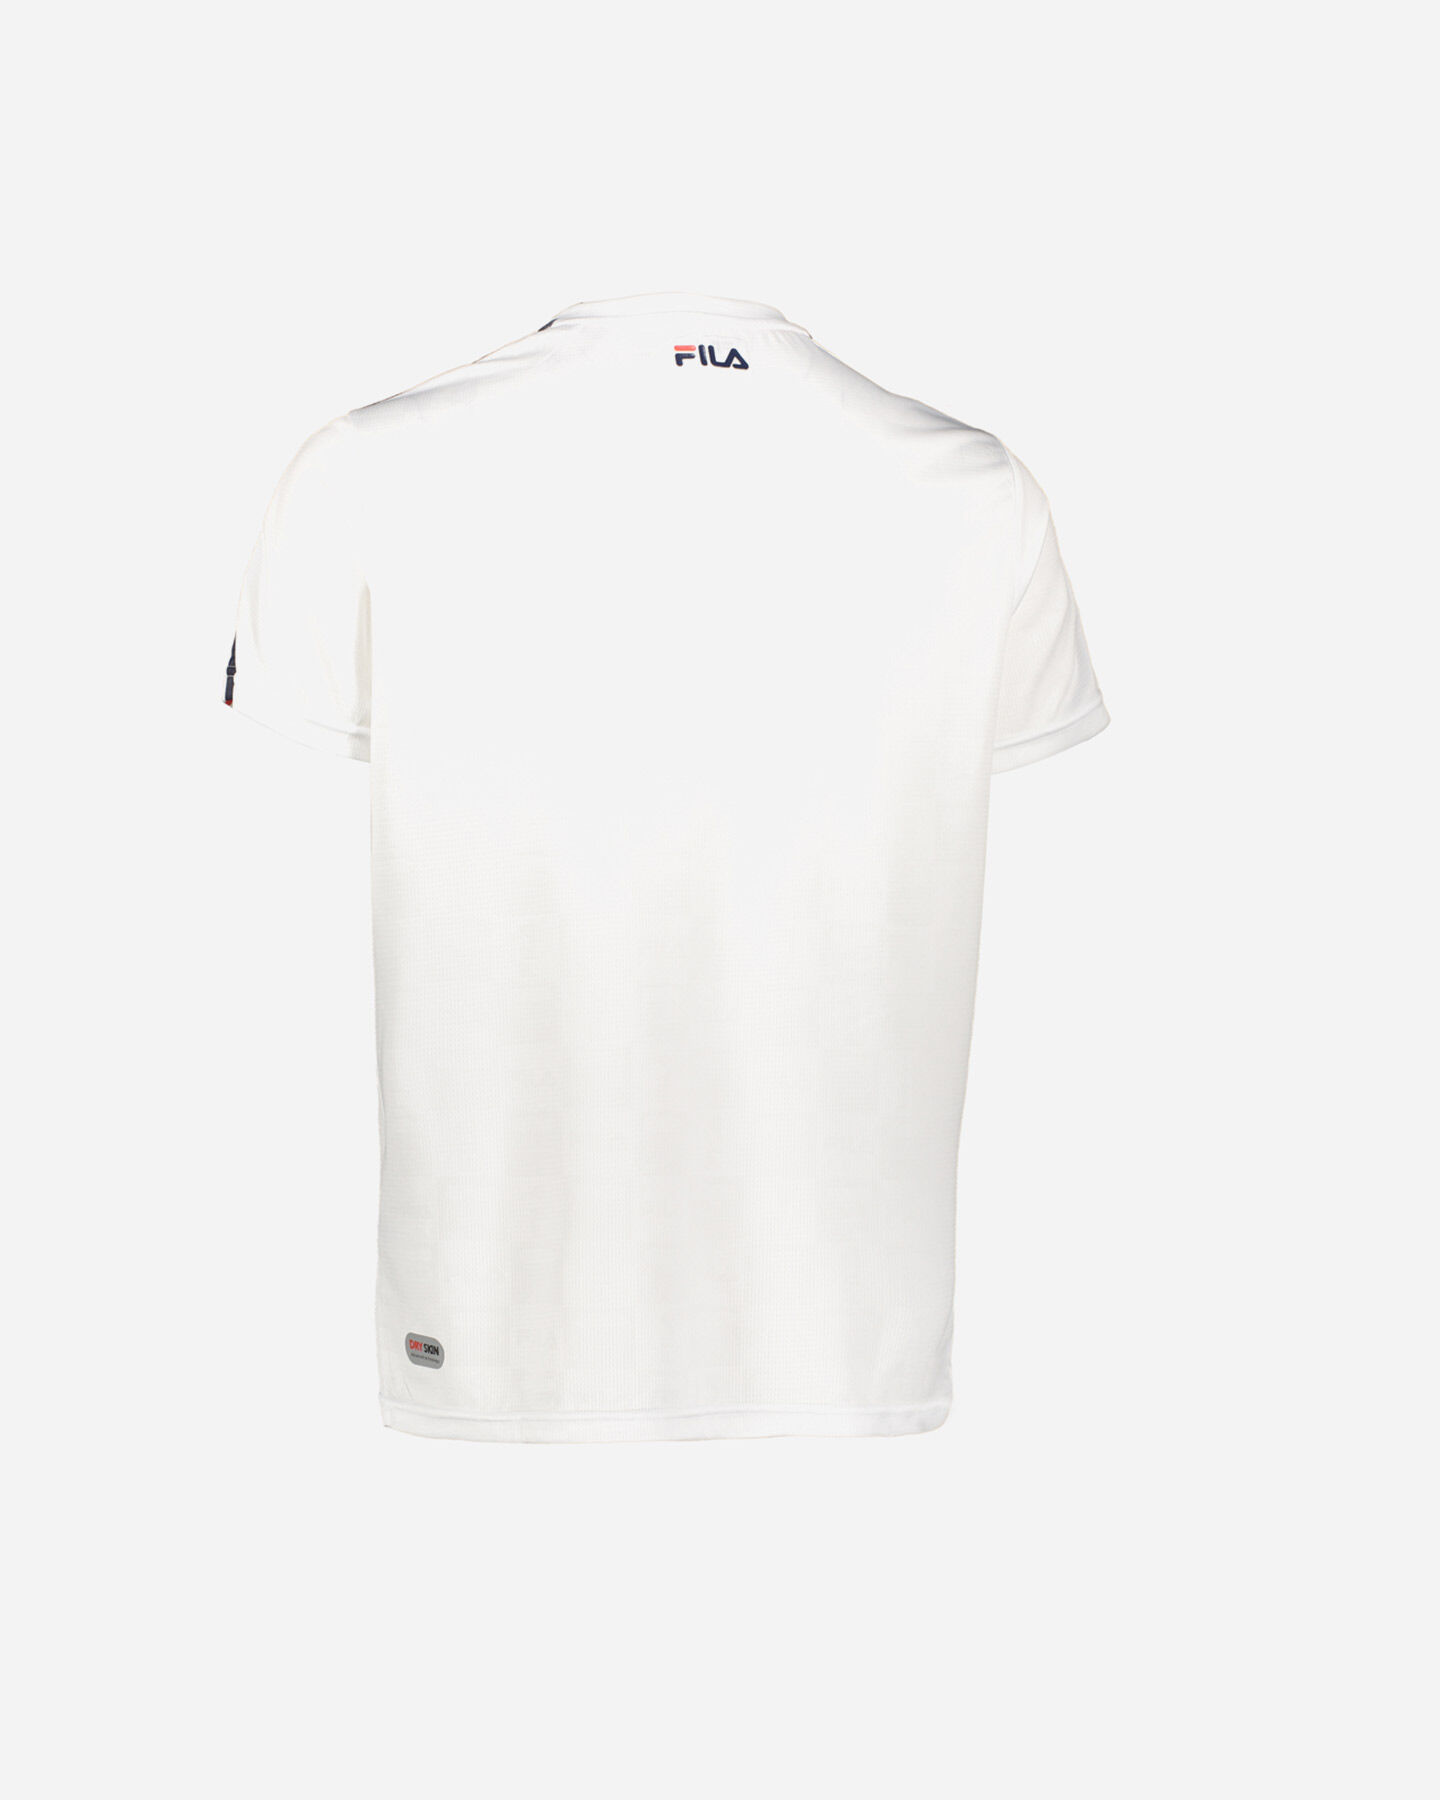  T-Shirt tennis FILA TENNIS ALL OVER M S4088227|001|S scatto 1